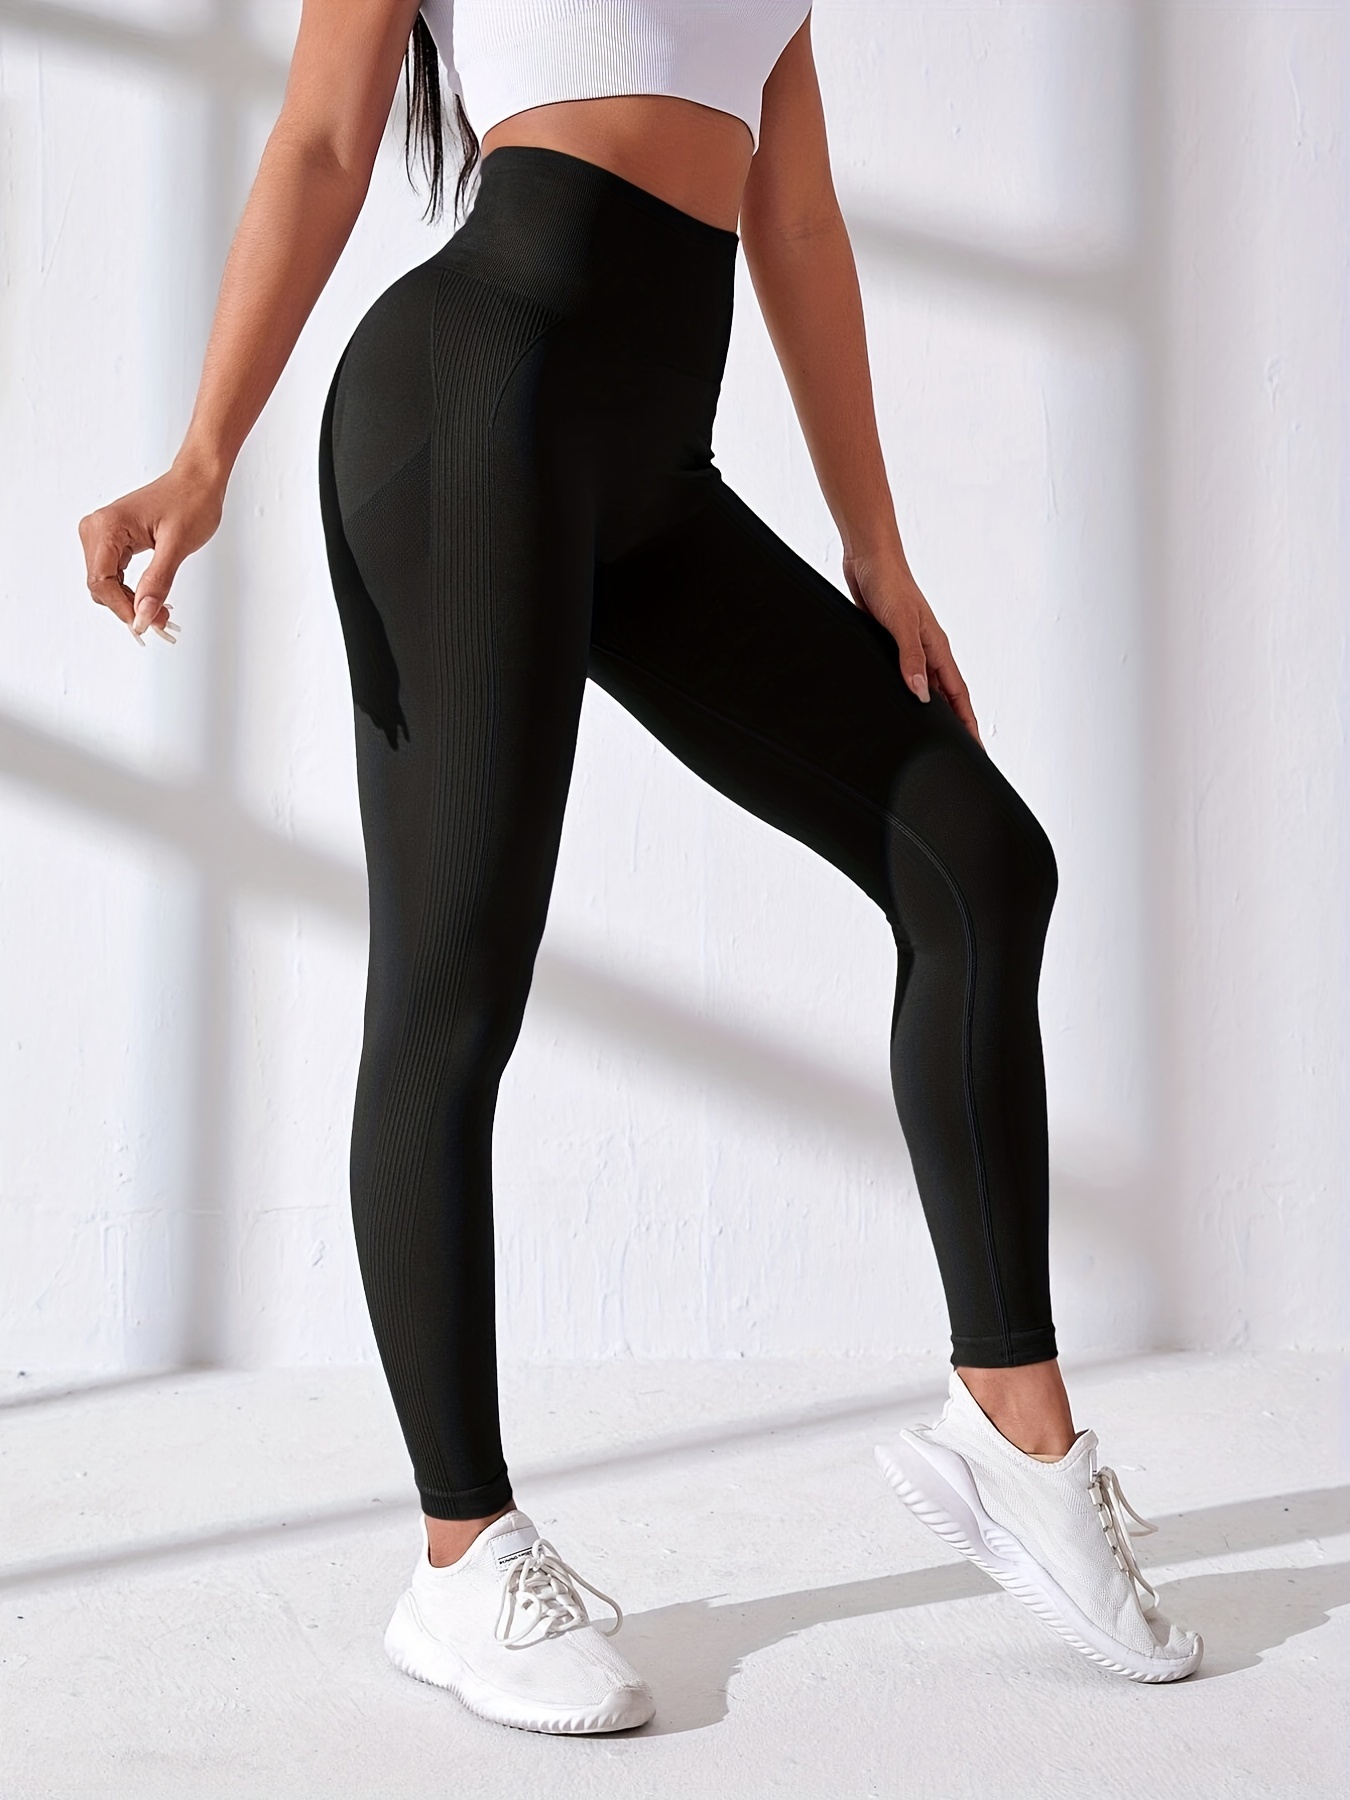 Solid Color Yoga Sports Leggings Stretchy High Waist Fitness